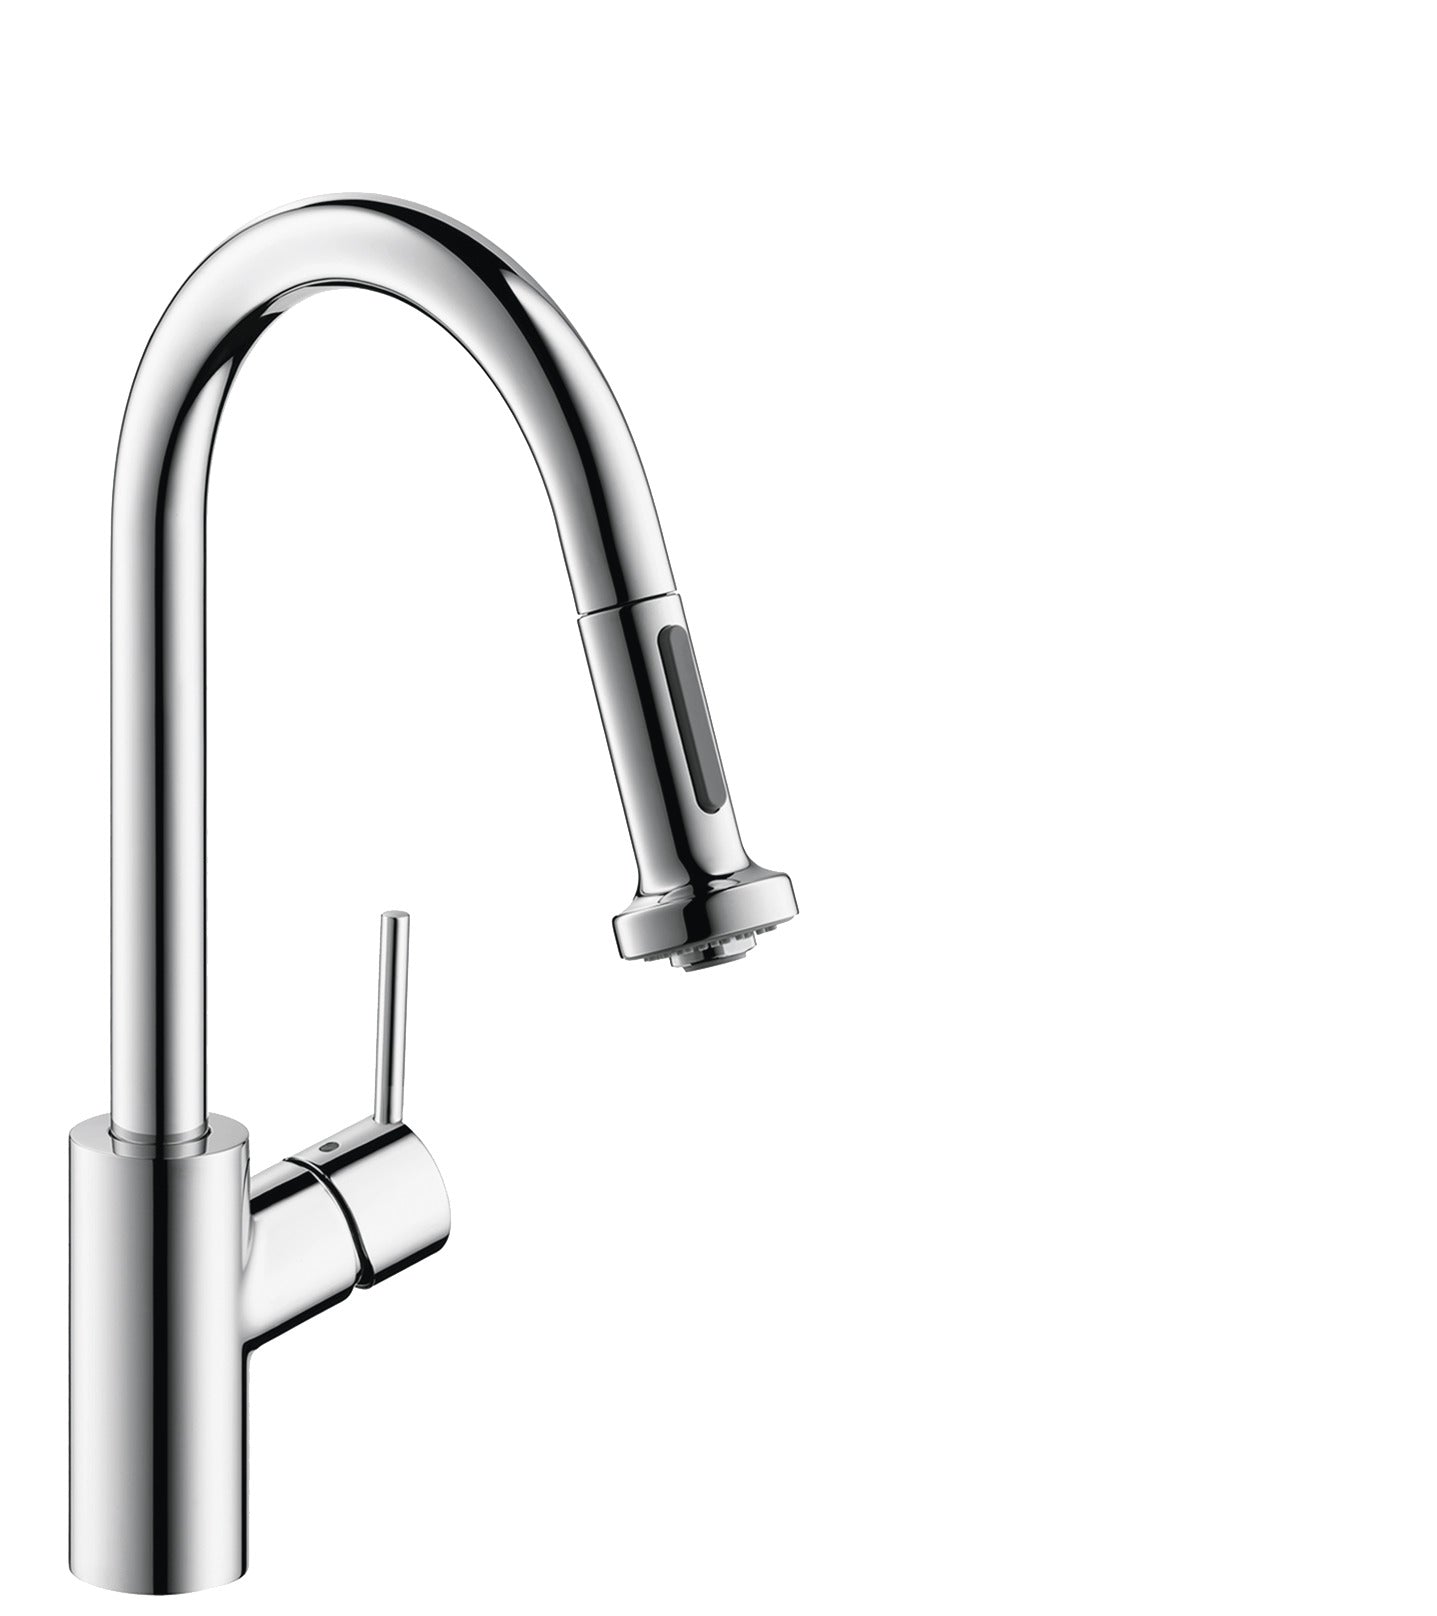 HANSGROHE 14877001 Chrome Talis S² Modern Kitchen Faucet 1.75 GPM